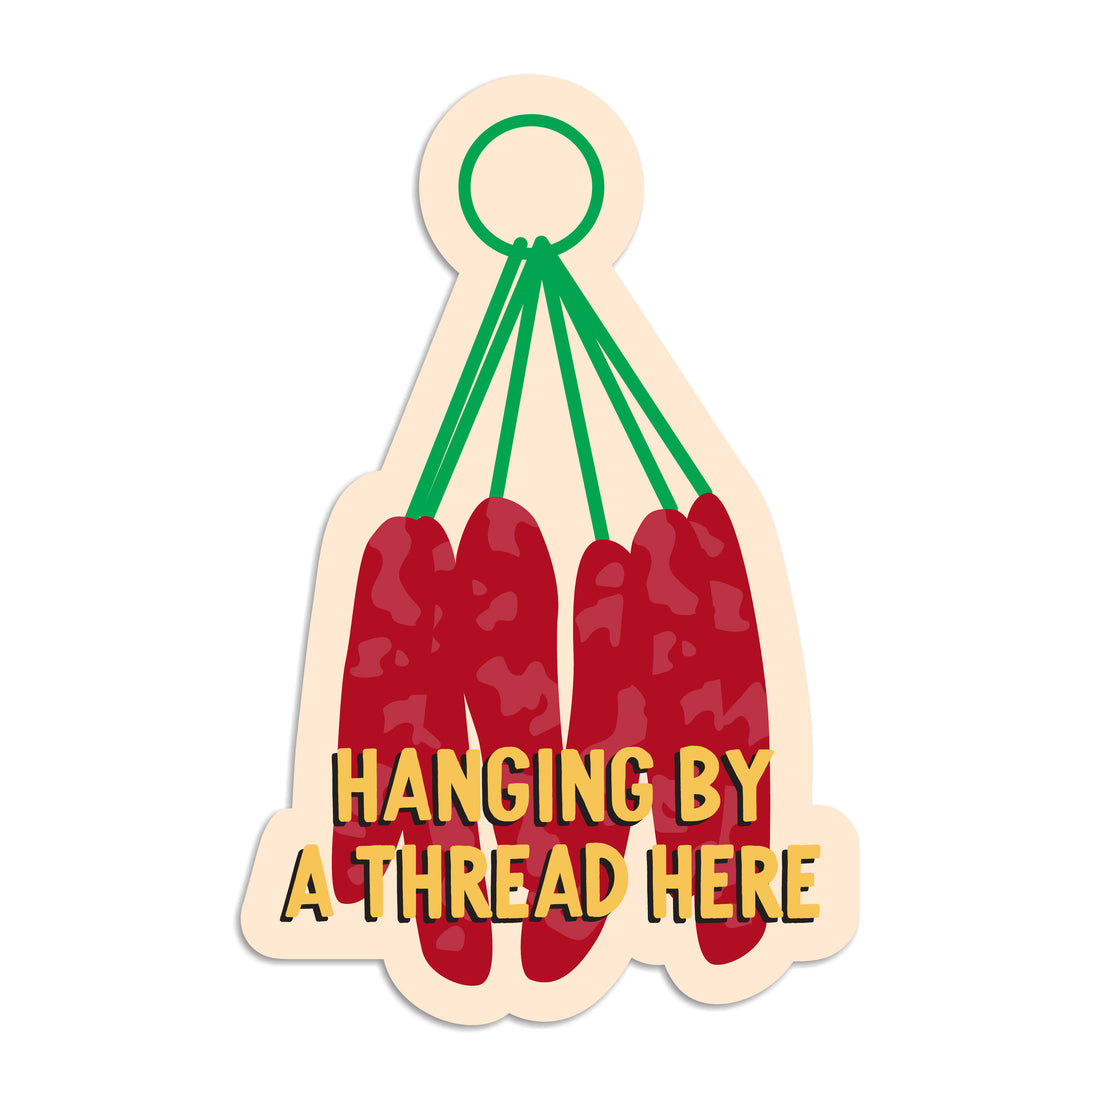 Lap cheong Chinese sausage hanging on by a thread here vinyl sticker by I&